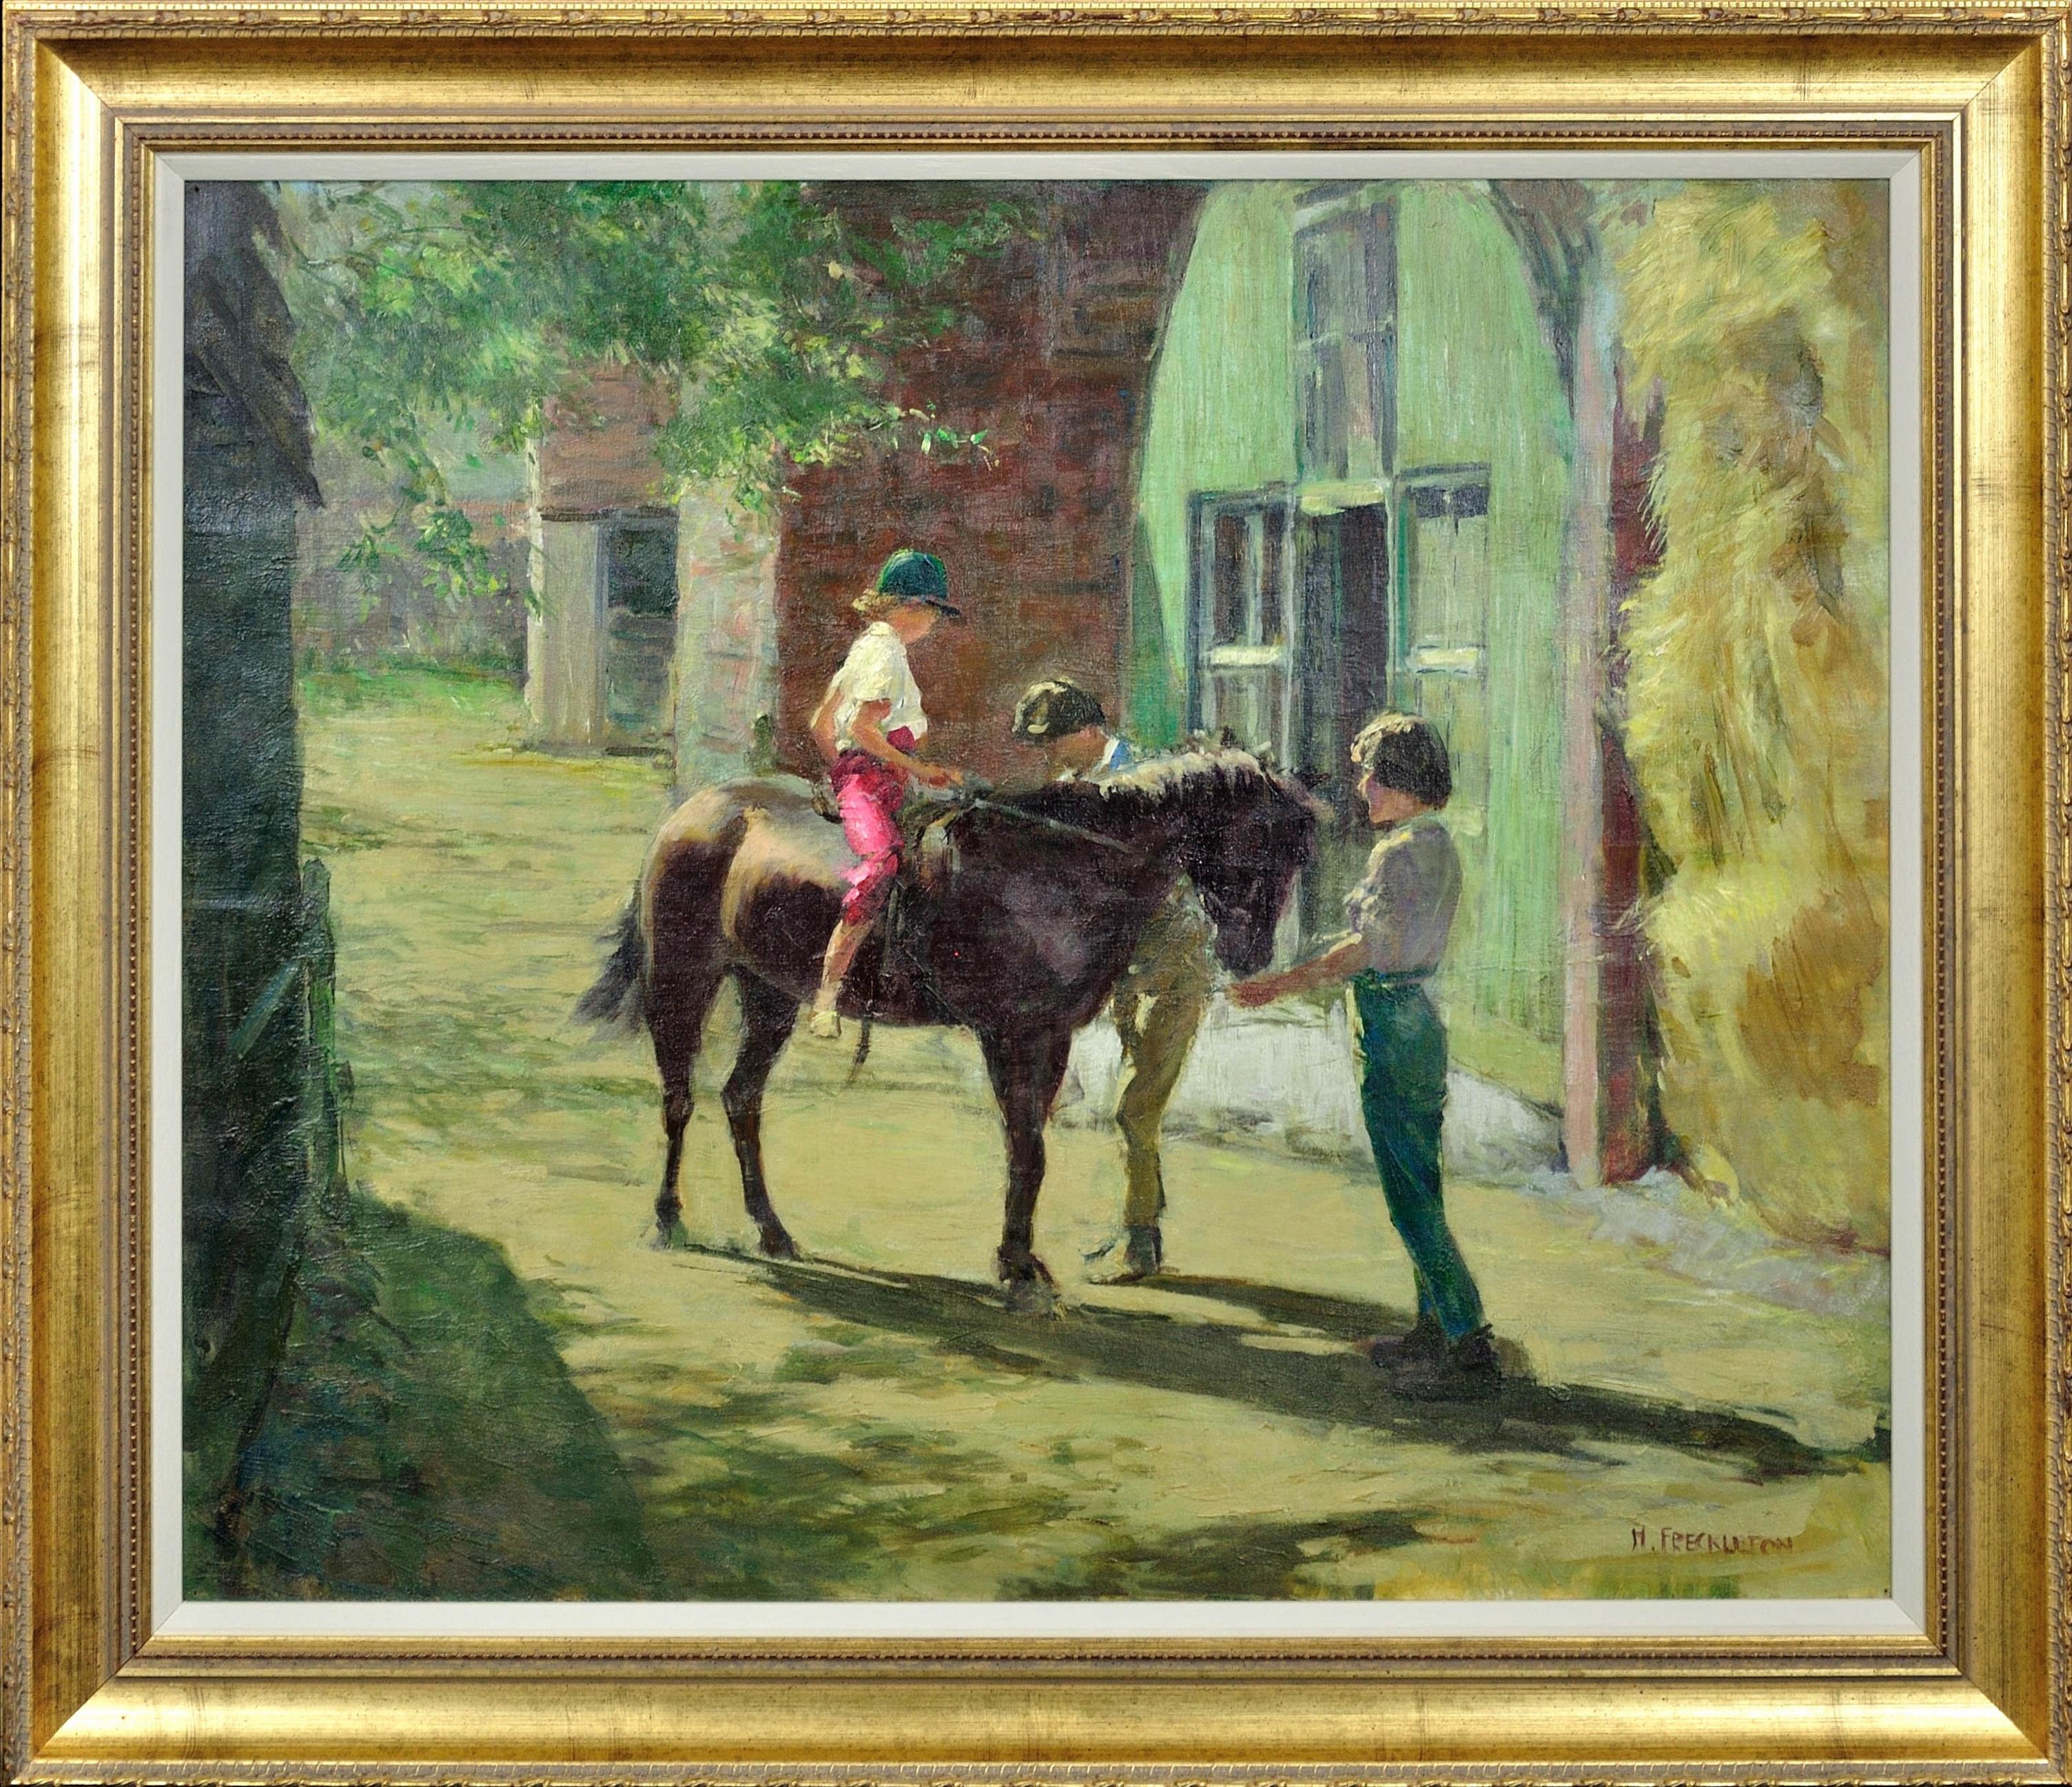 Milly with Minstrel. Children with their Pony in Dappled Summer Sunlight.